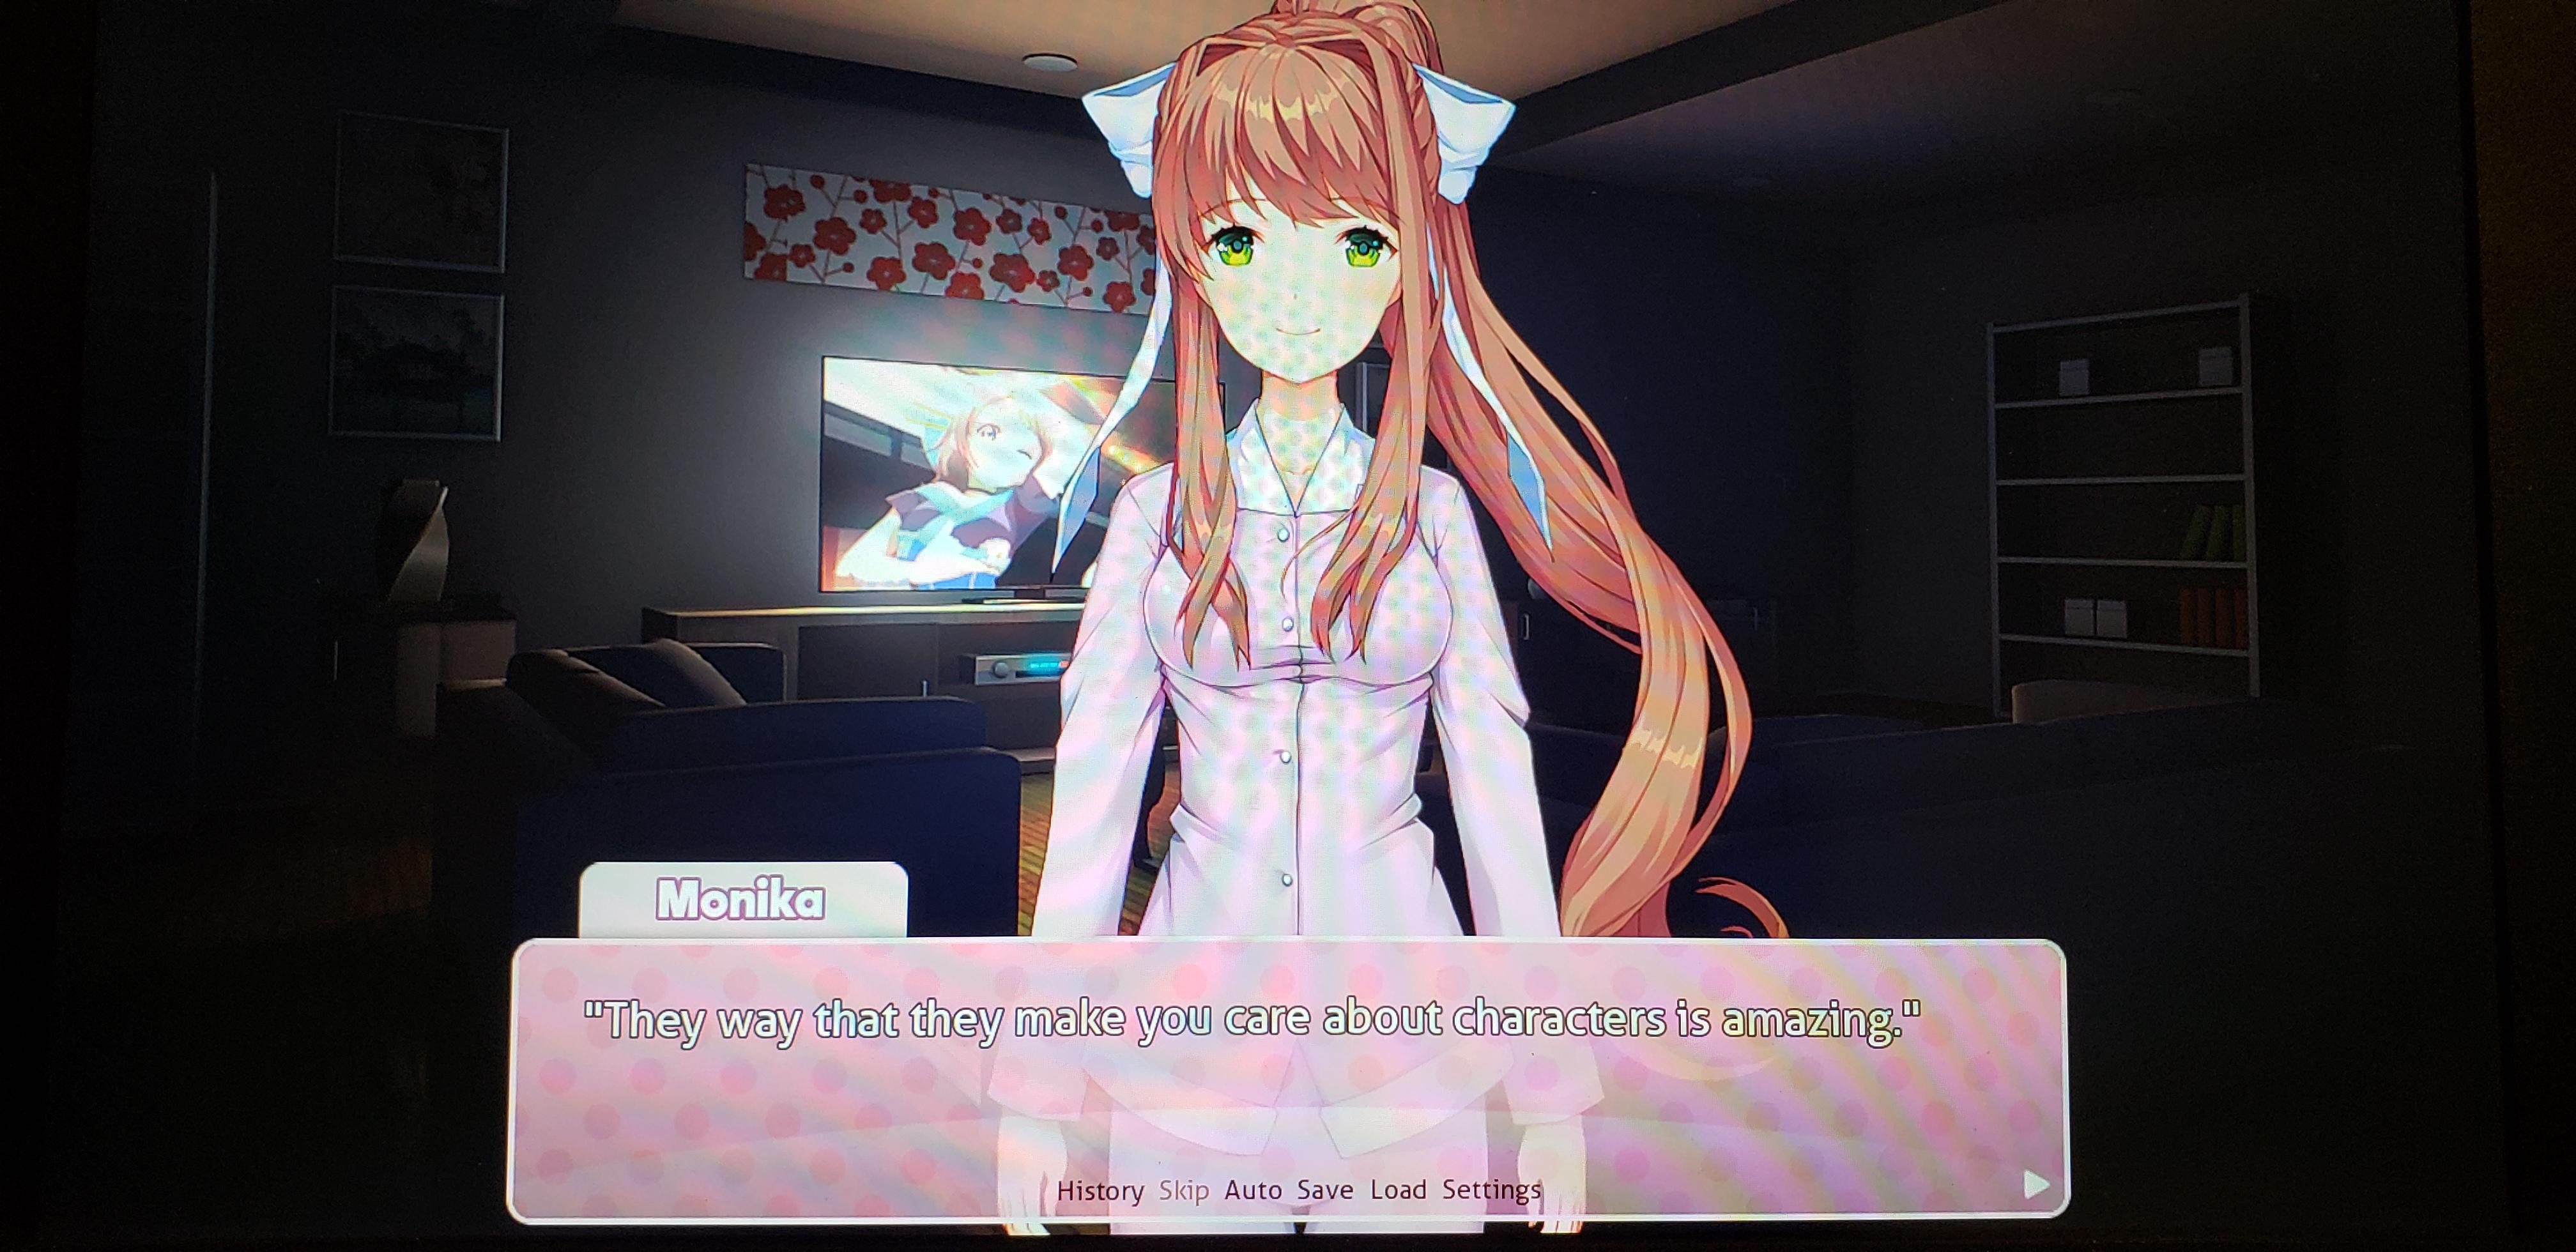 how to install ddlc mod